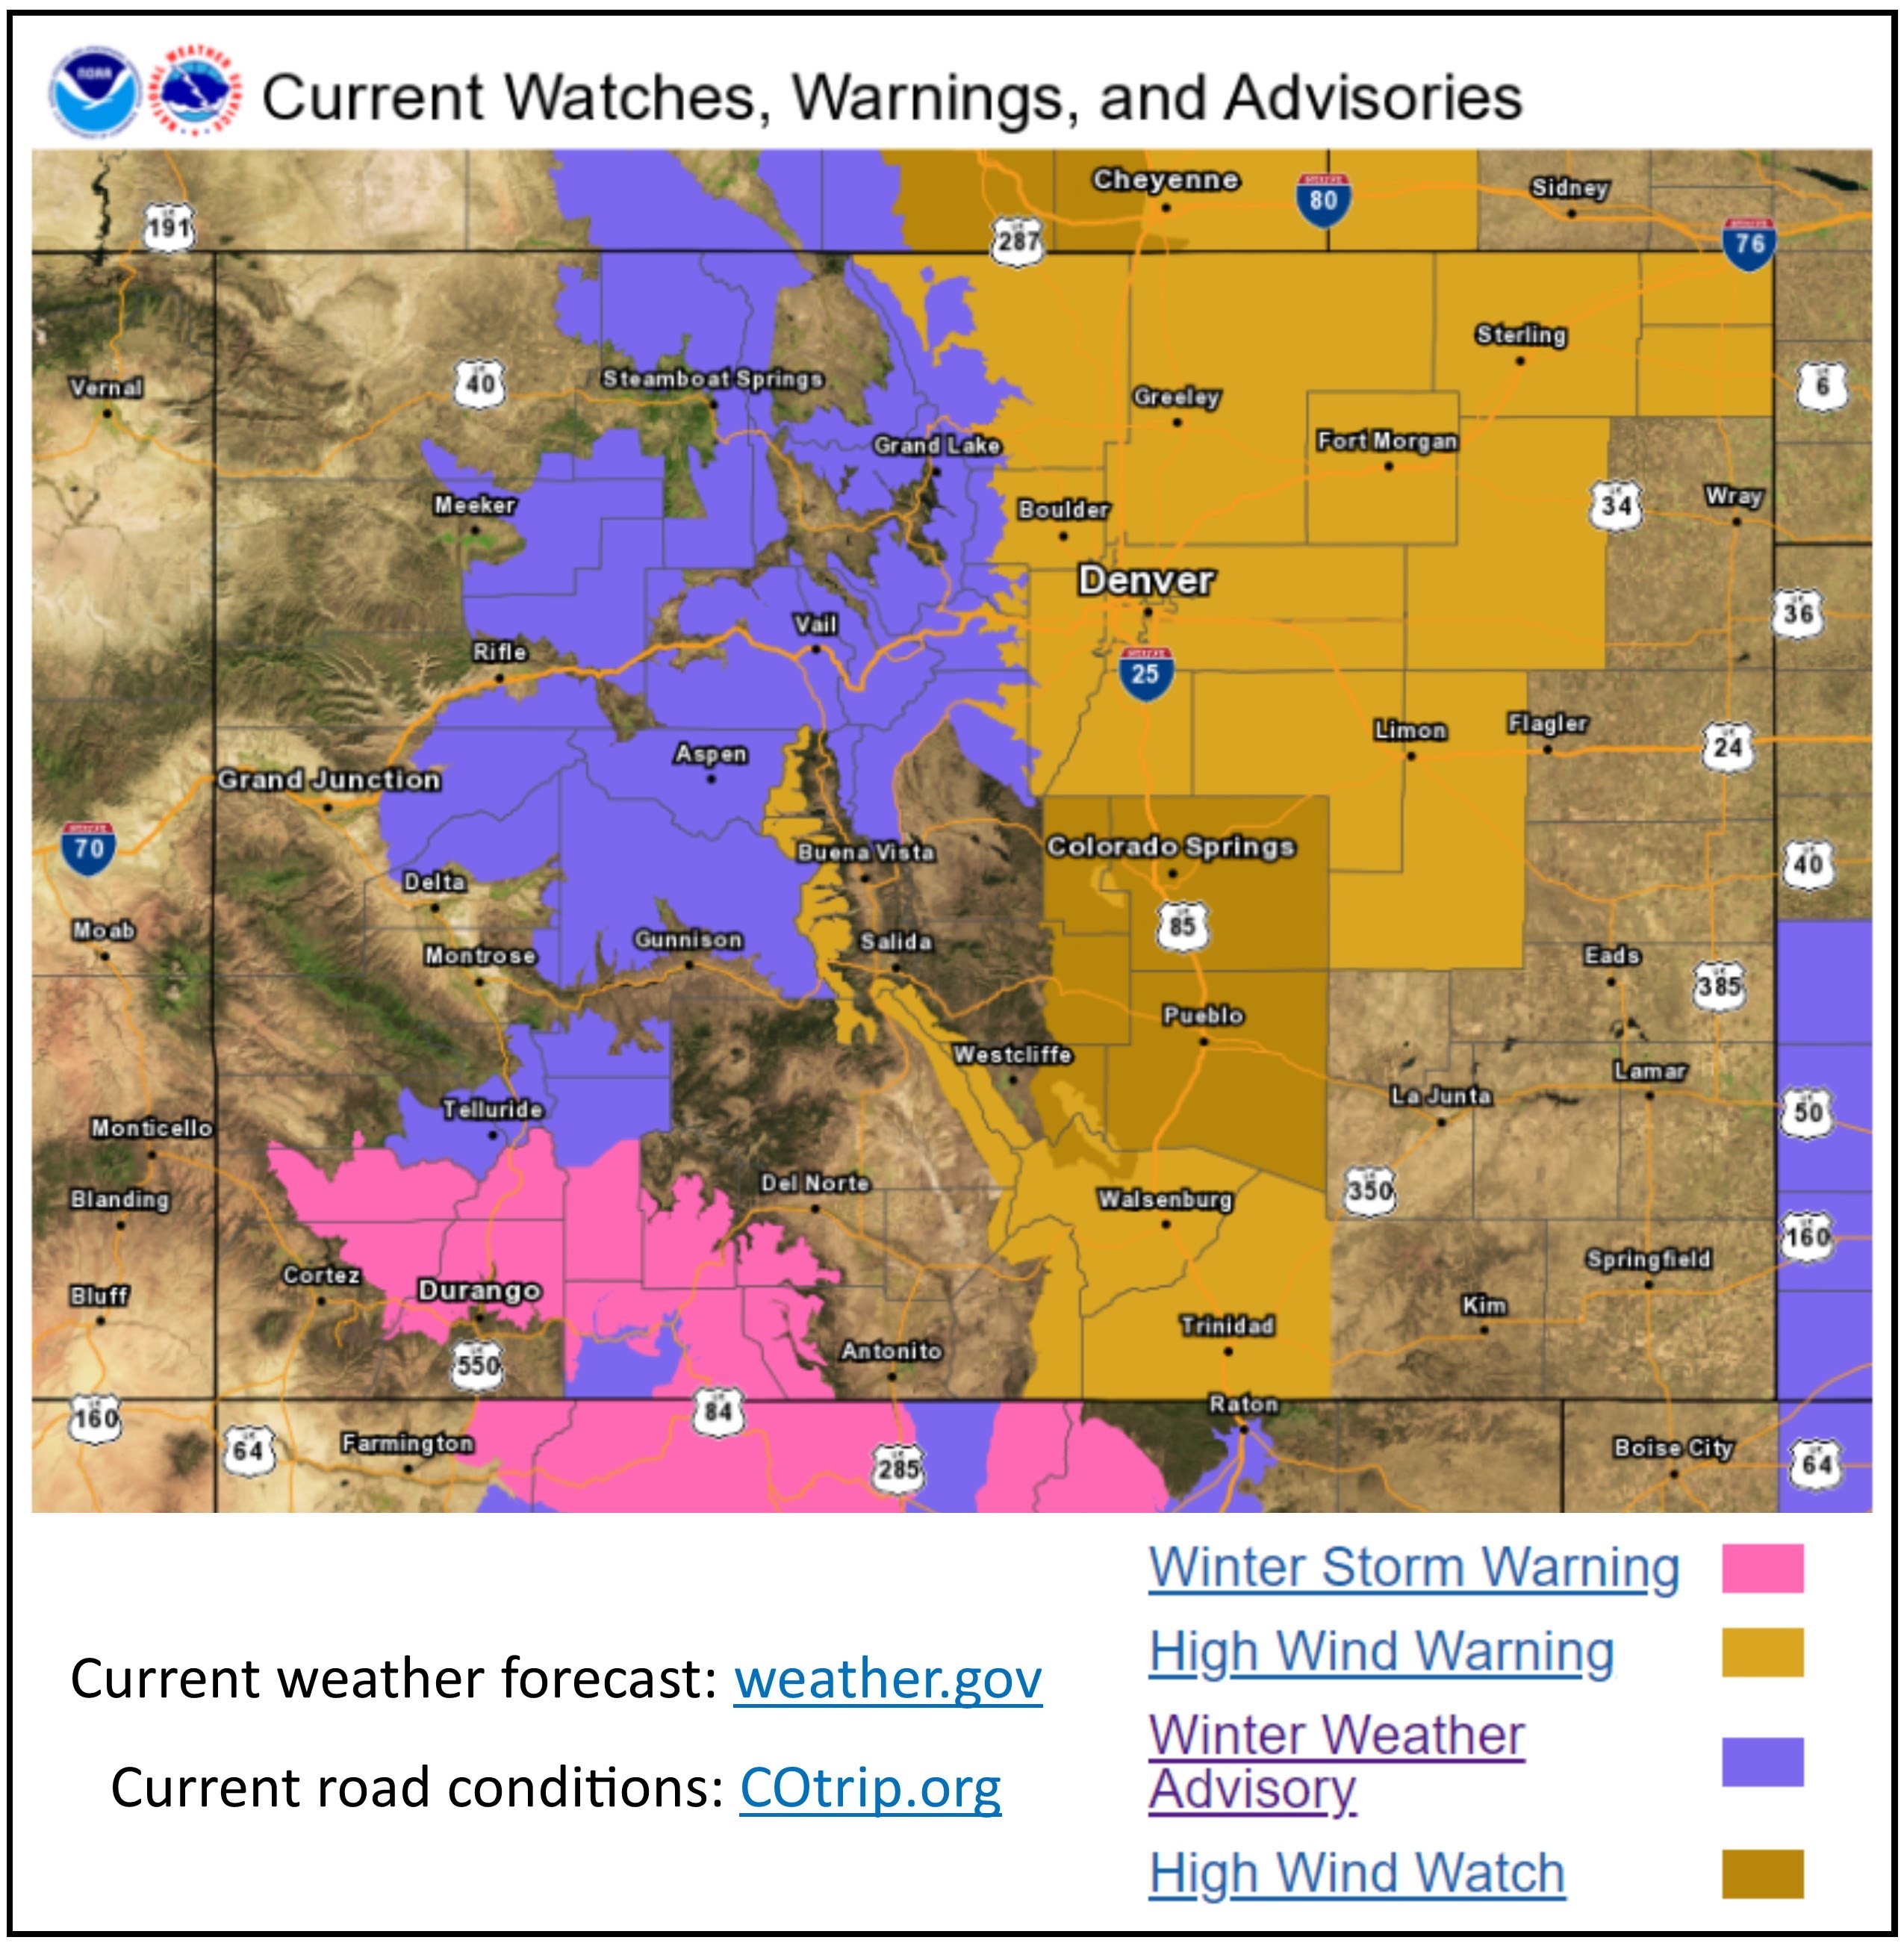 Current watches, warnings and advisories on 1-17-20 map detail image